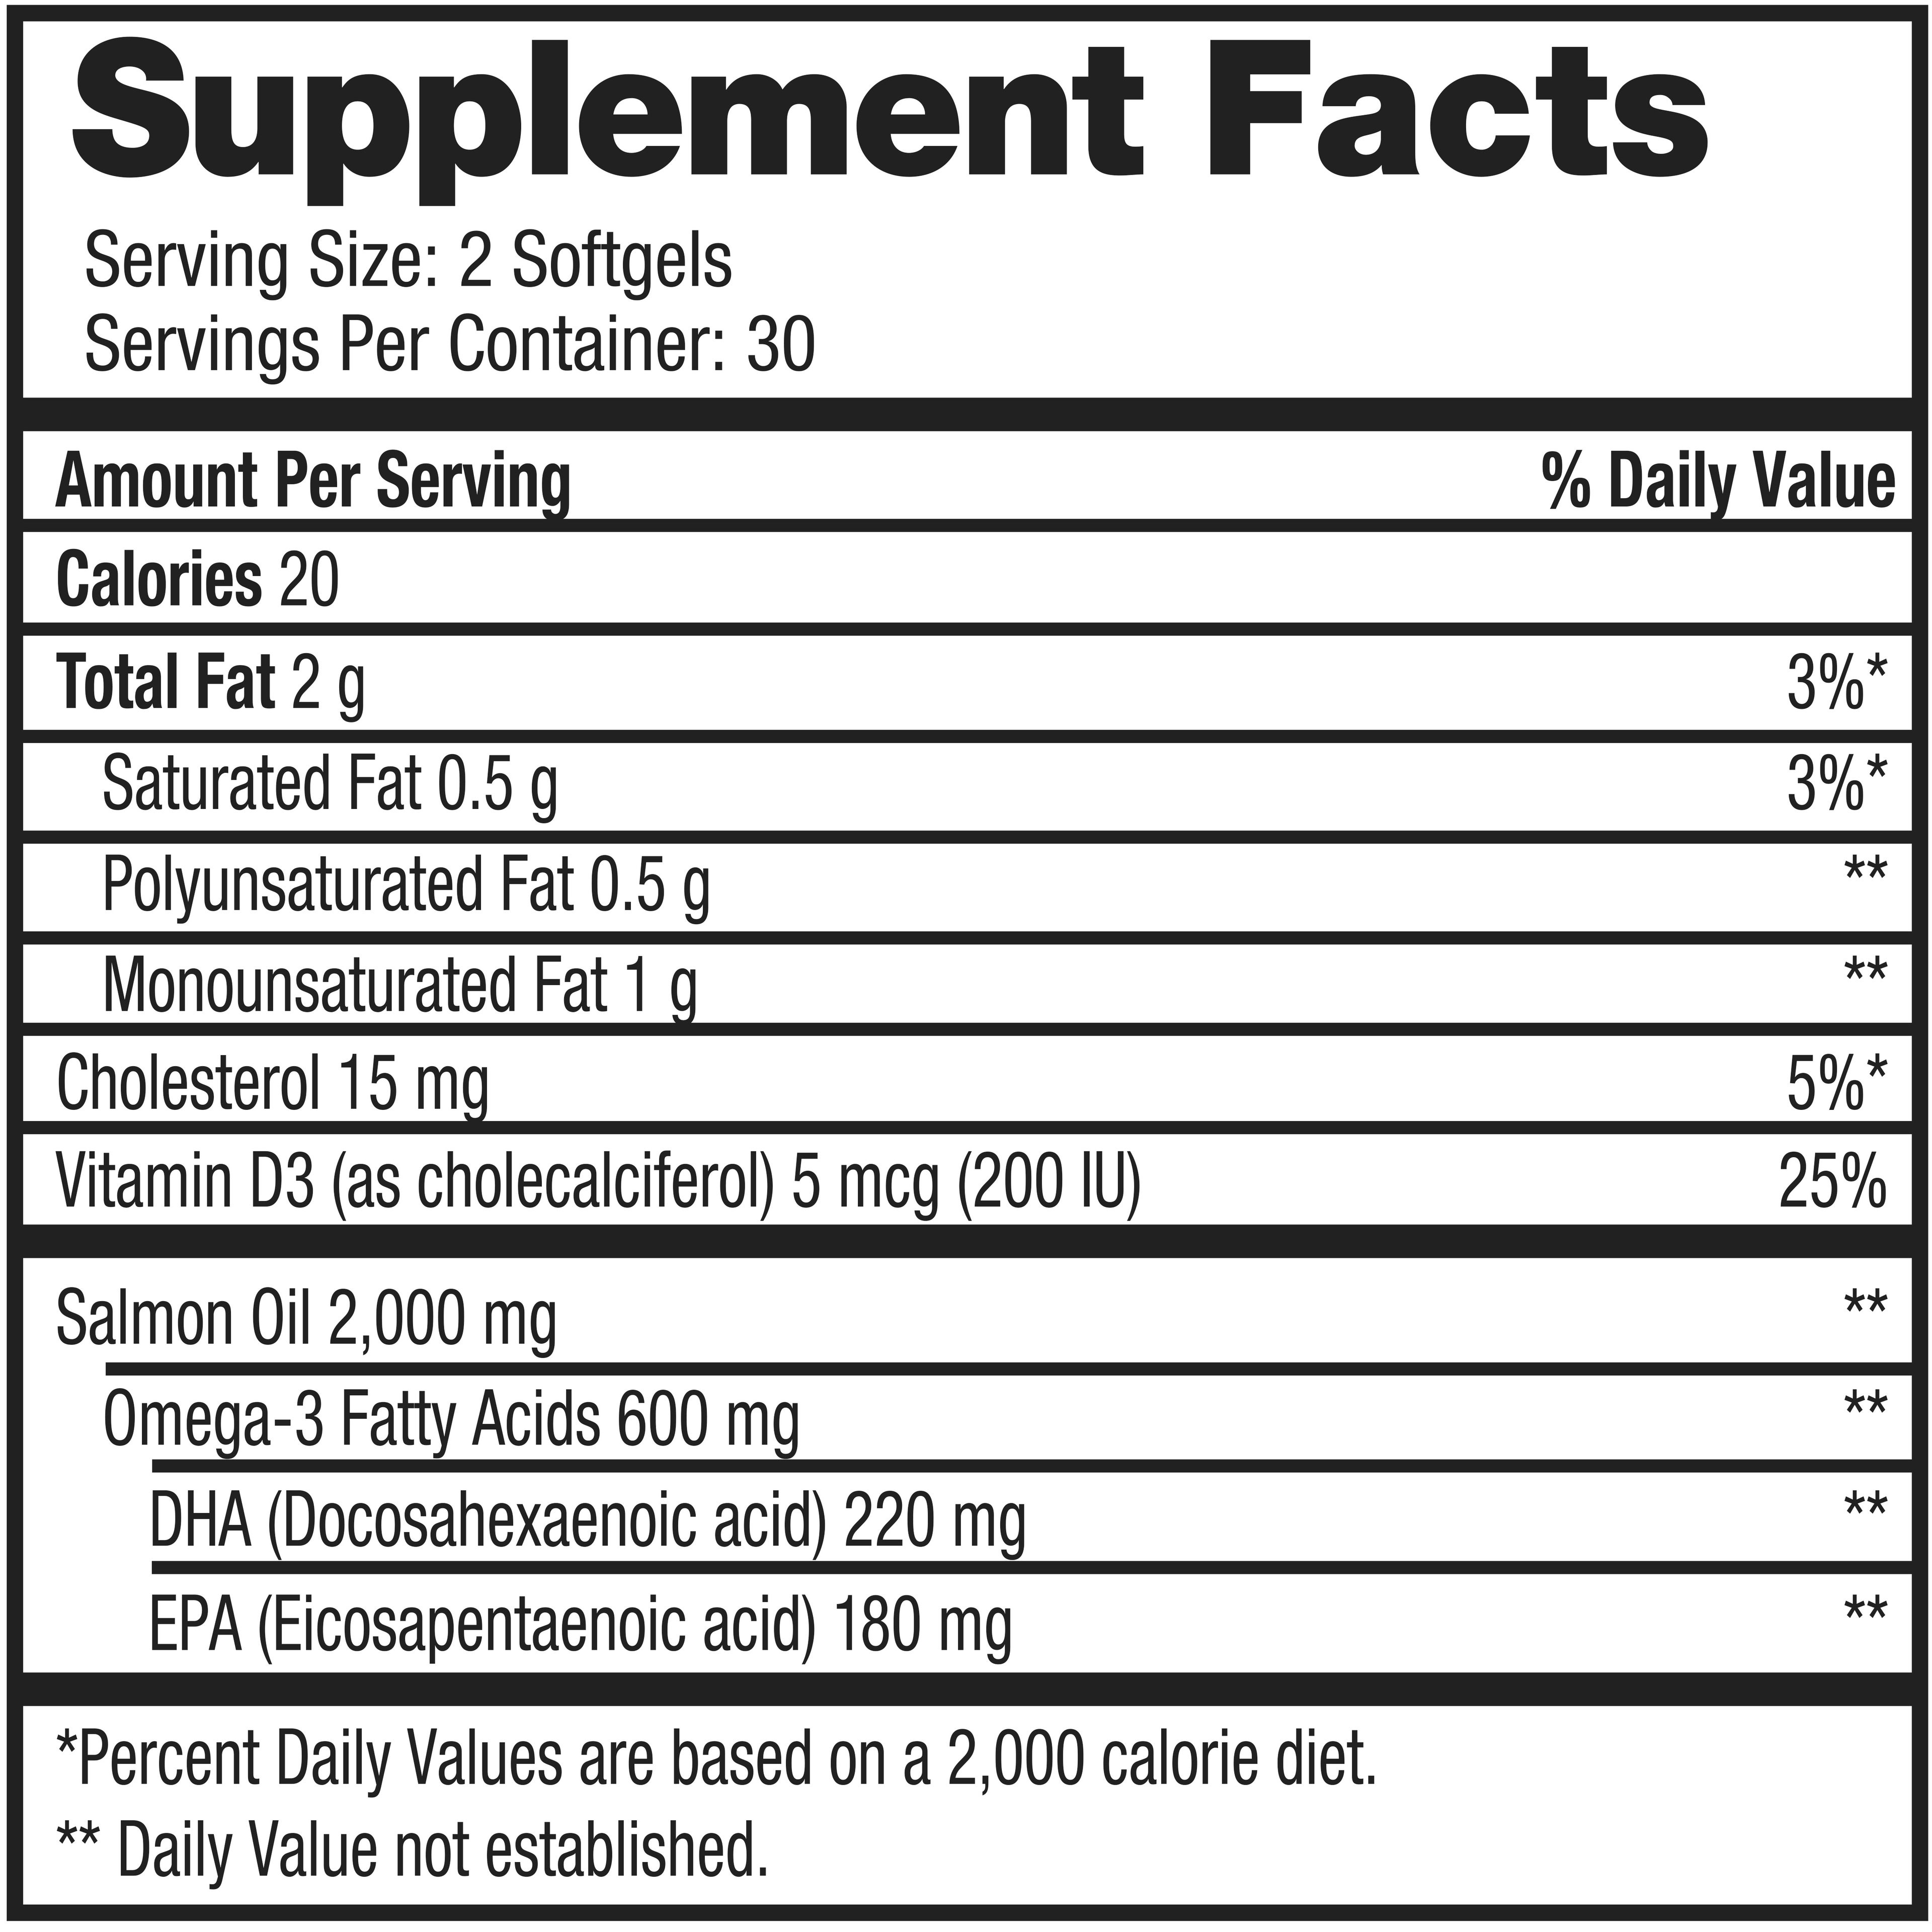 Supplement Facts for undefined